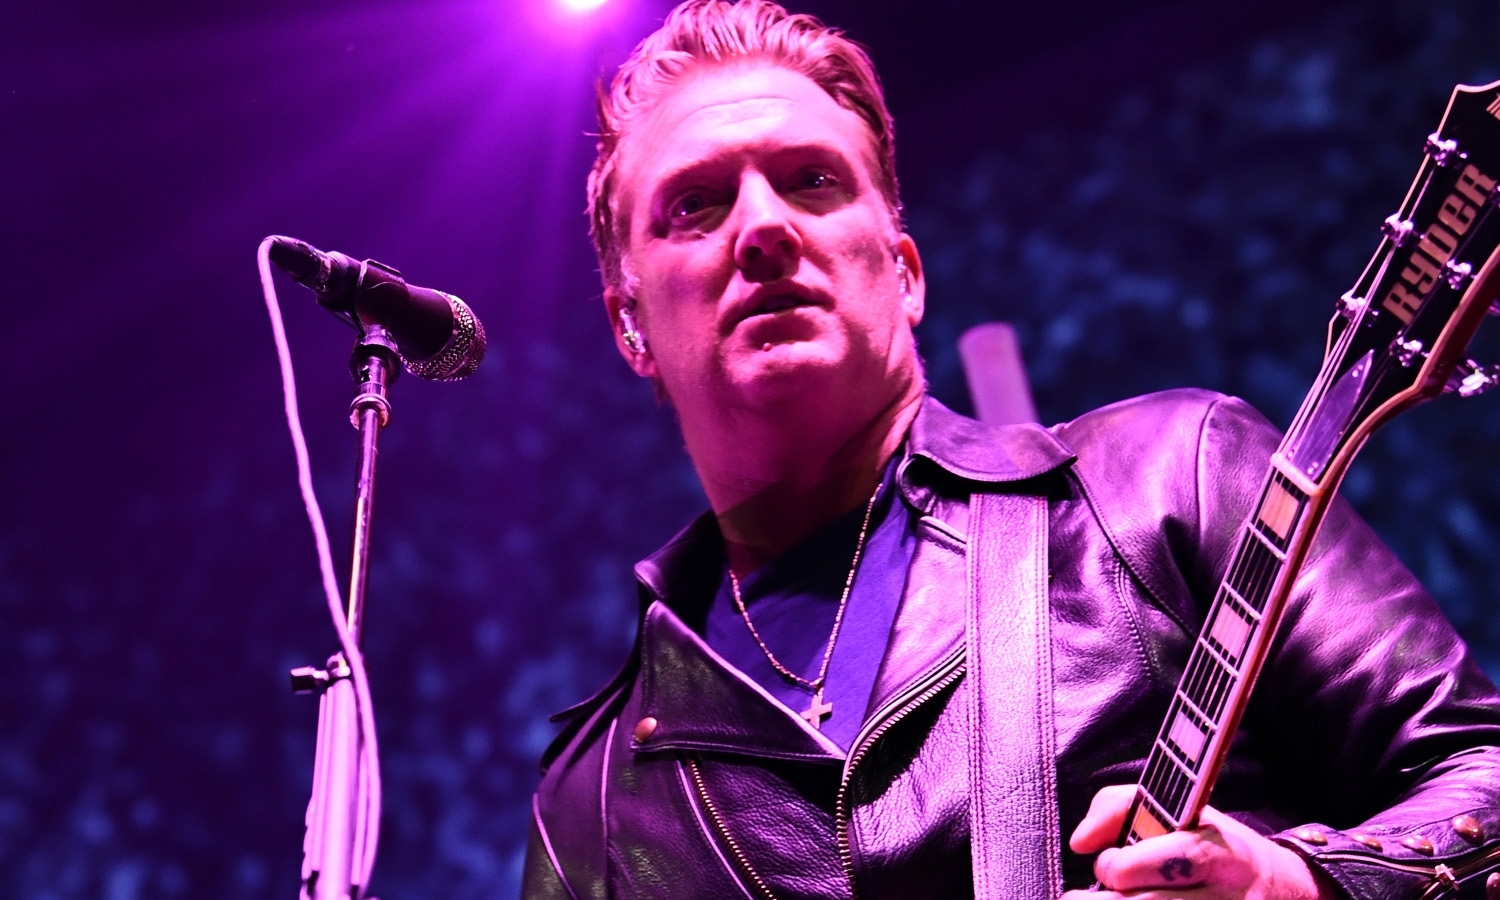 Rocker Josh Homme Apologizes For Kicking Photographer: 'I Was A Total Dick'